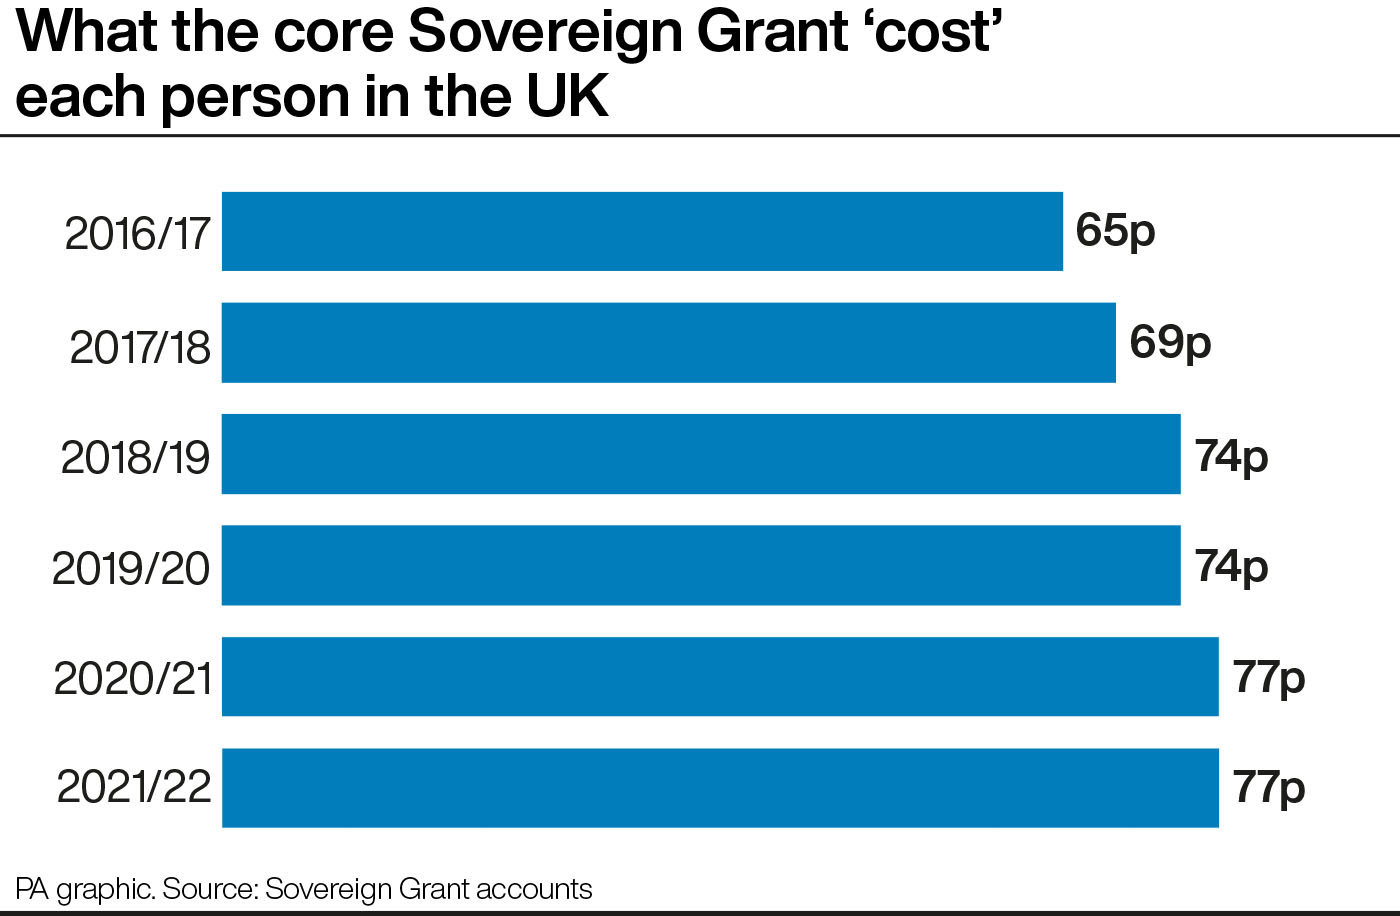 The cost of the core Sovereign Grant per person in the UK